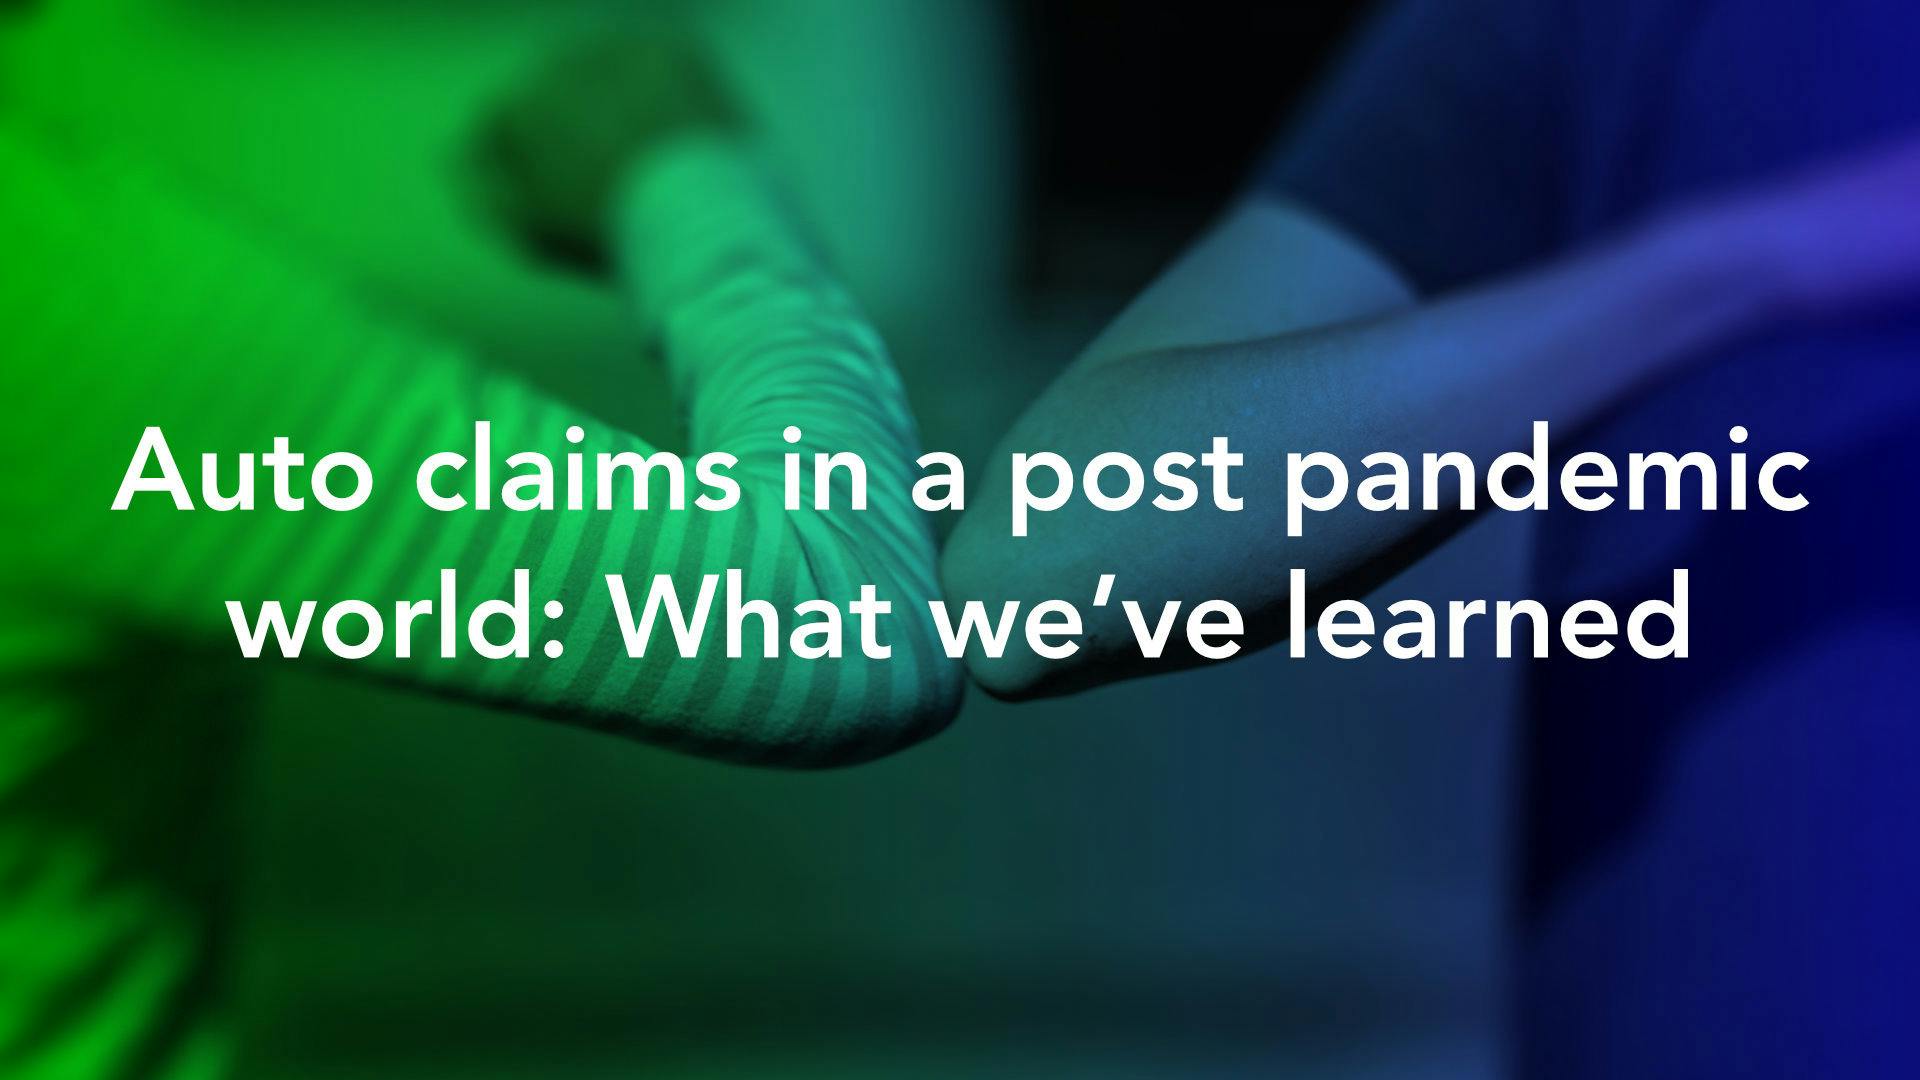 Auto claims in a post pandemic world – what we’ve learned